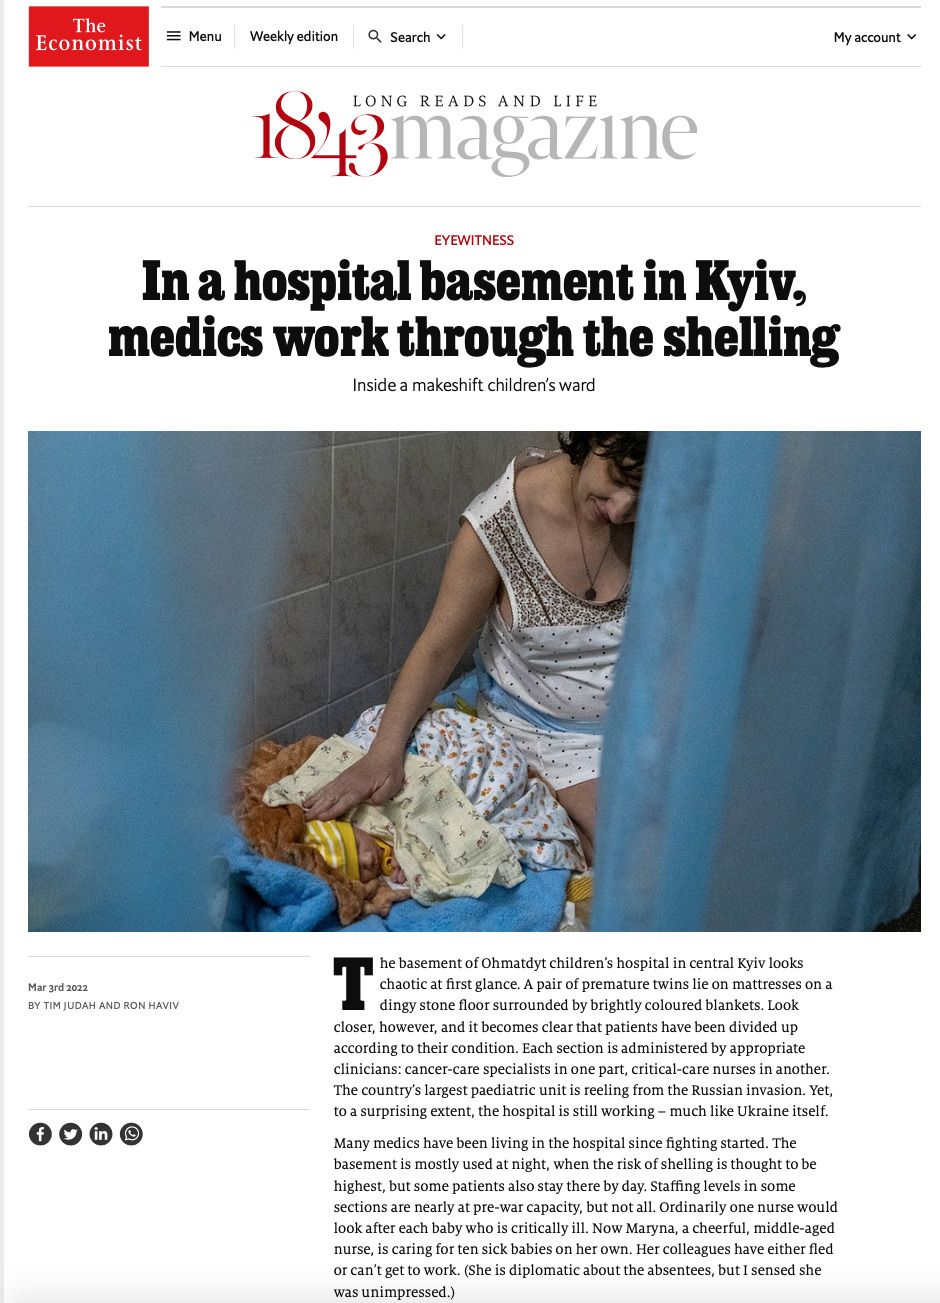 Photos by Ron Haviv / VII of doctors and nurses taking care of mothers and children in the basement shelter of the Ohmatdyt ChildrenÕs Hospital in Kyiv during the Russian invasion of Ukraine, in The Economist 1843 Magazine, March 3, 2022.